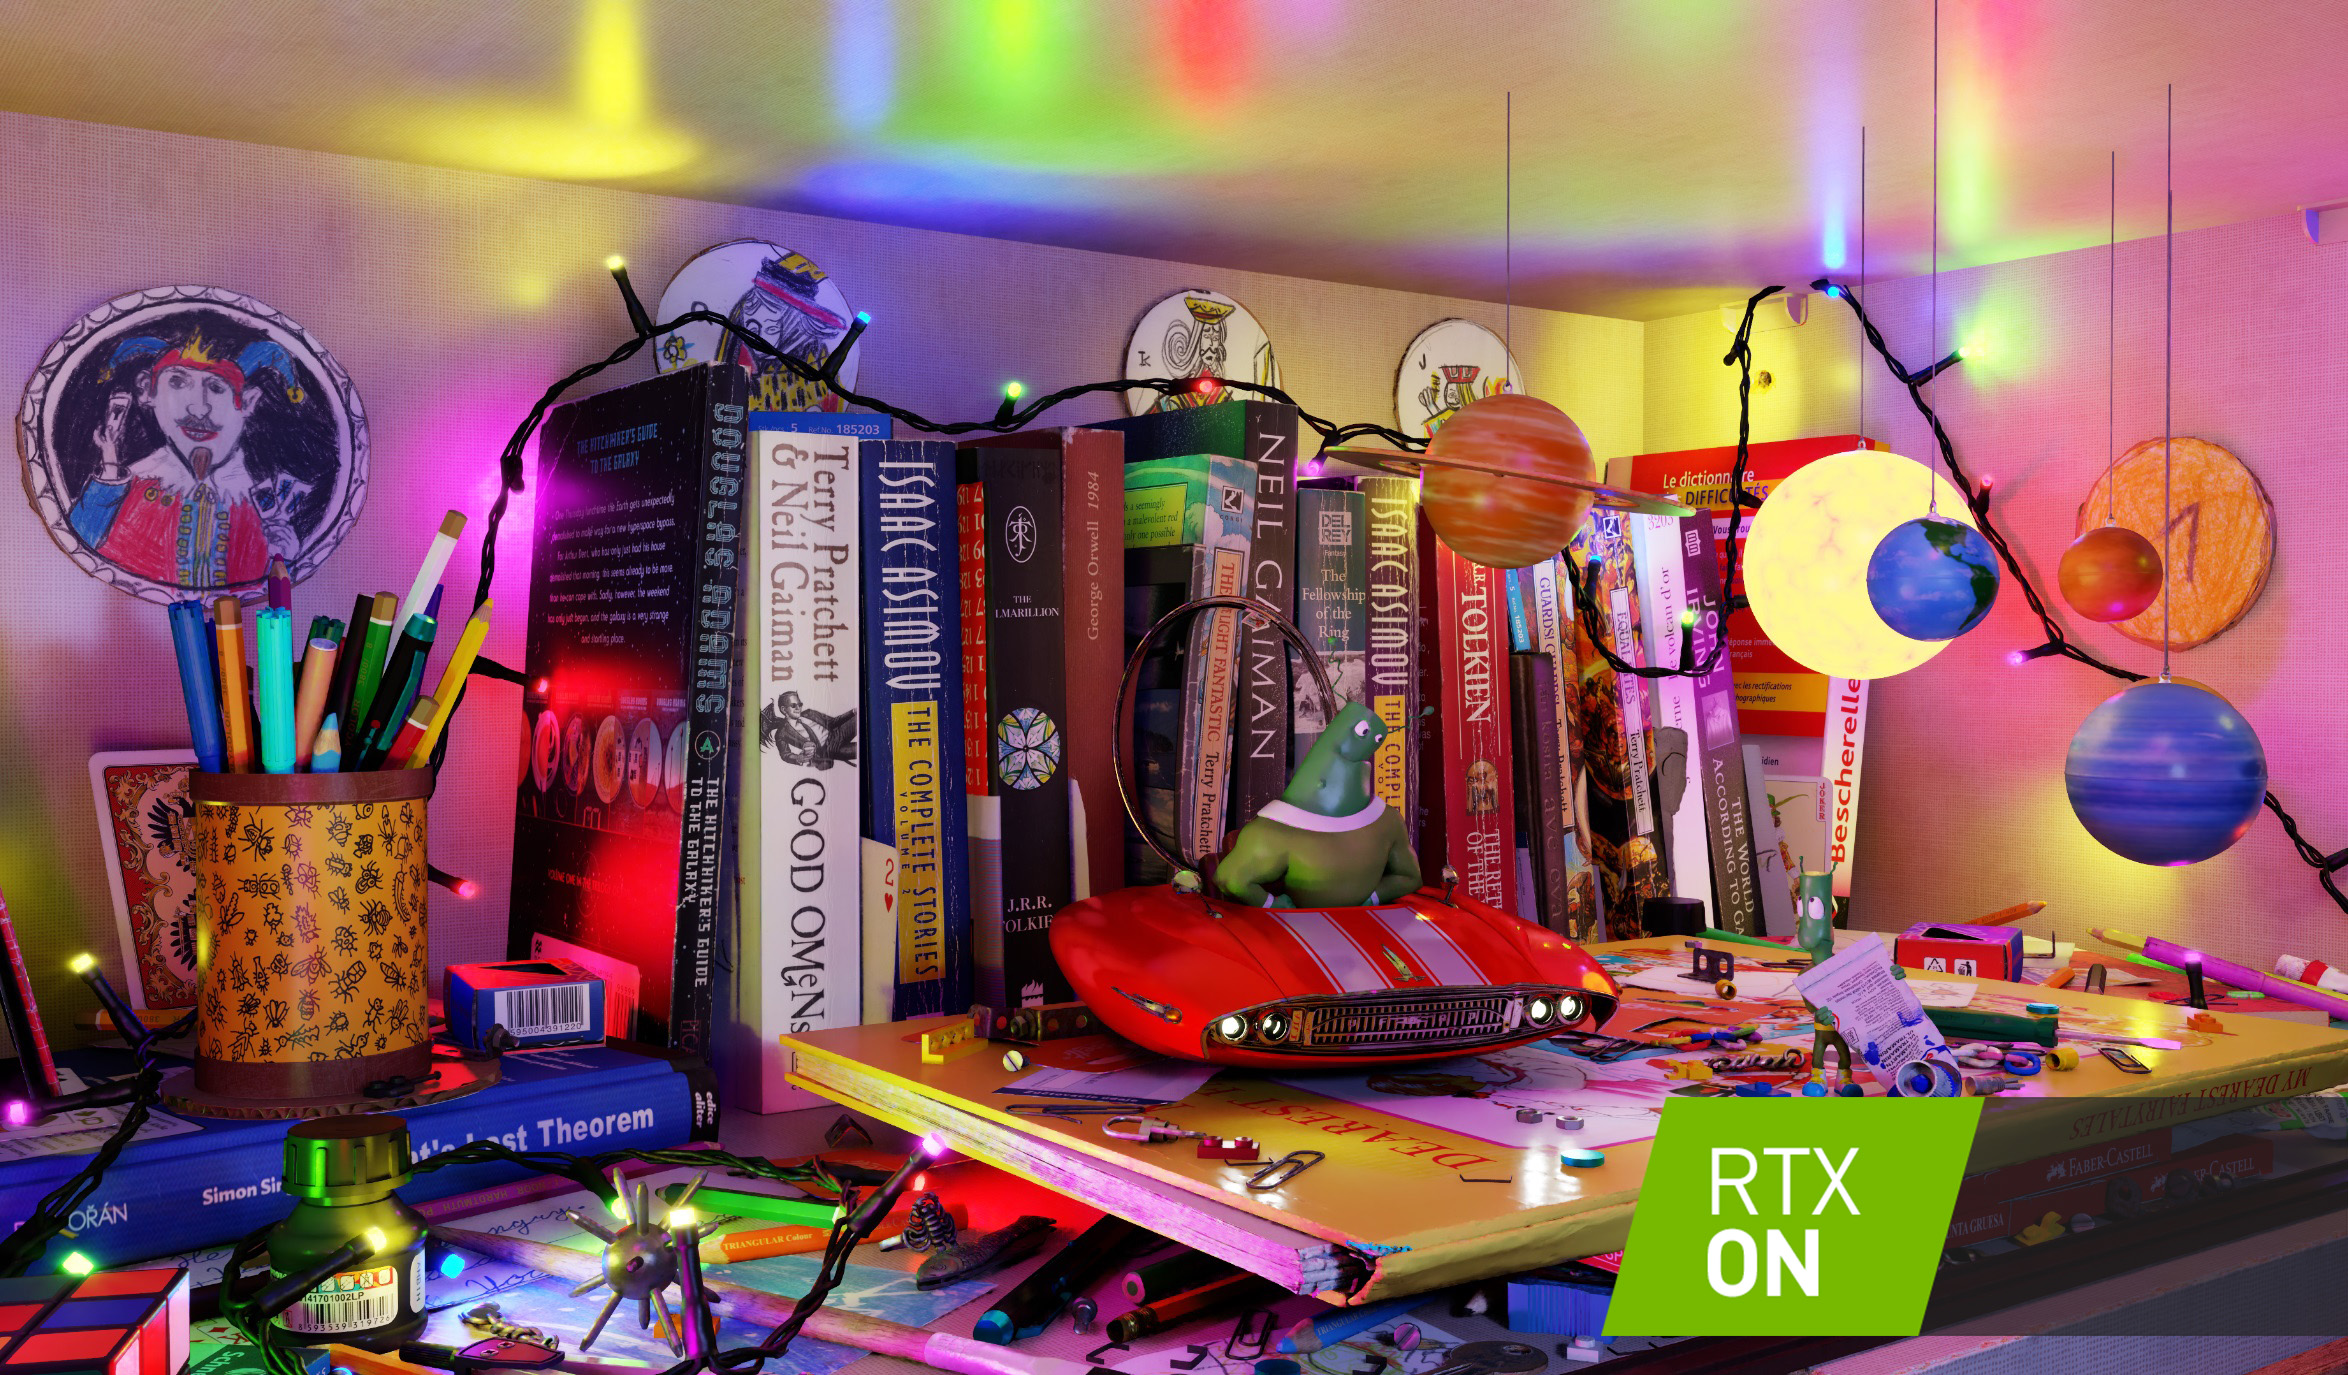 Ray trace up to millions of dynamic lights in real time with RTXDI on 